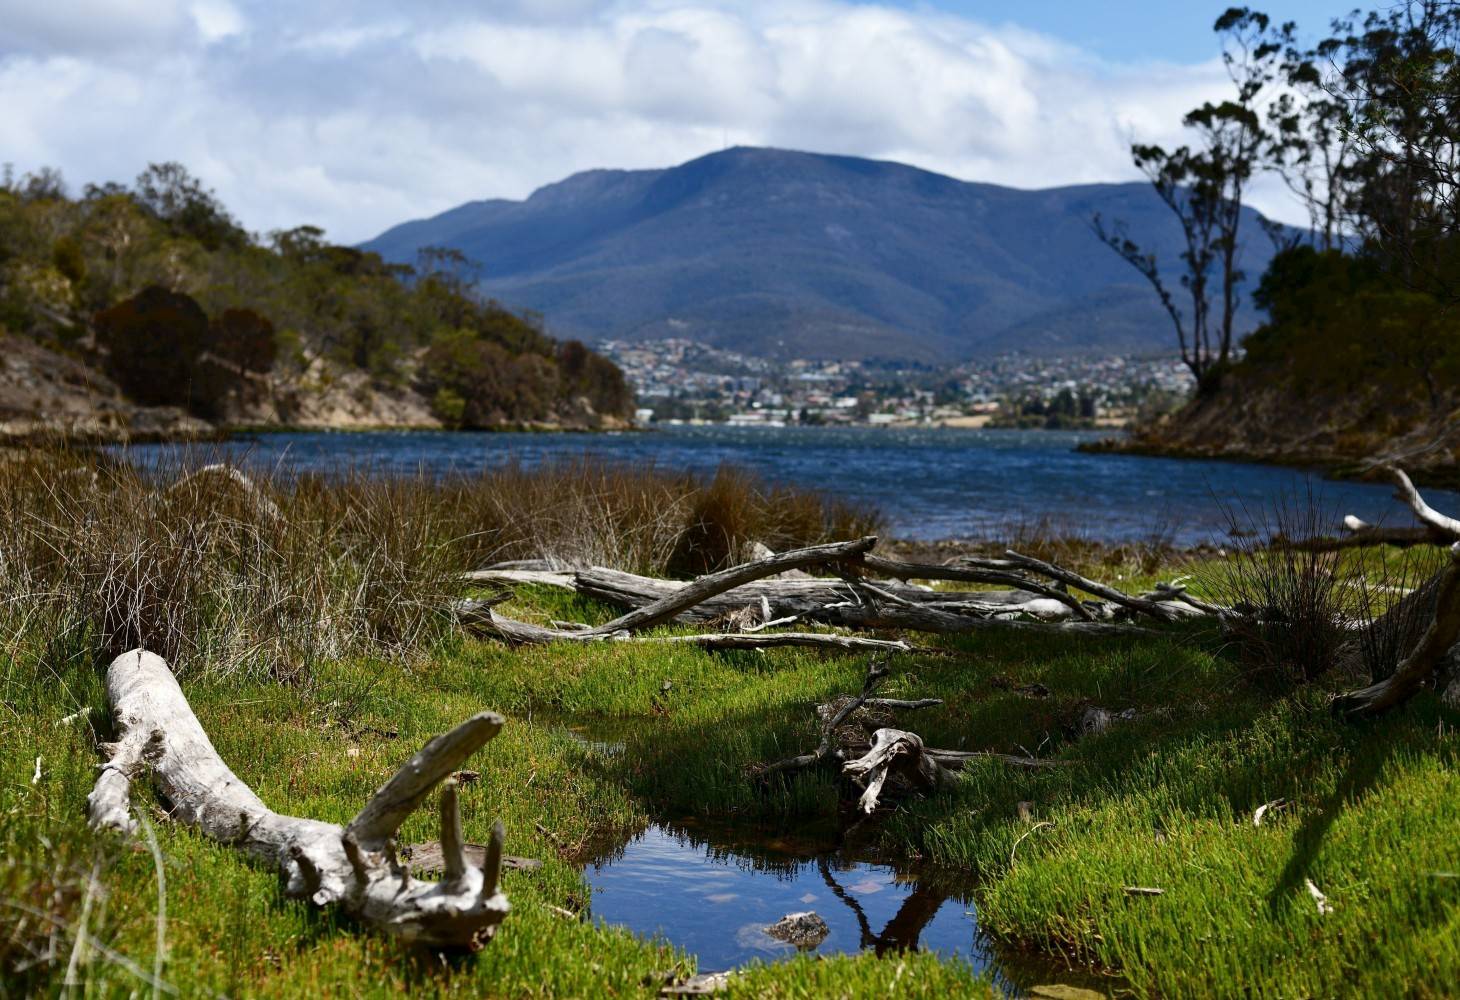 A view of Hobart from the eastern shore of the Derwent River